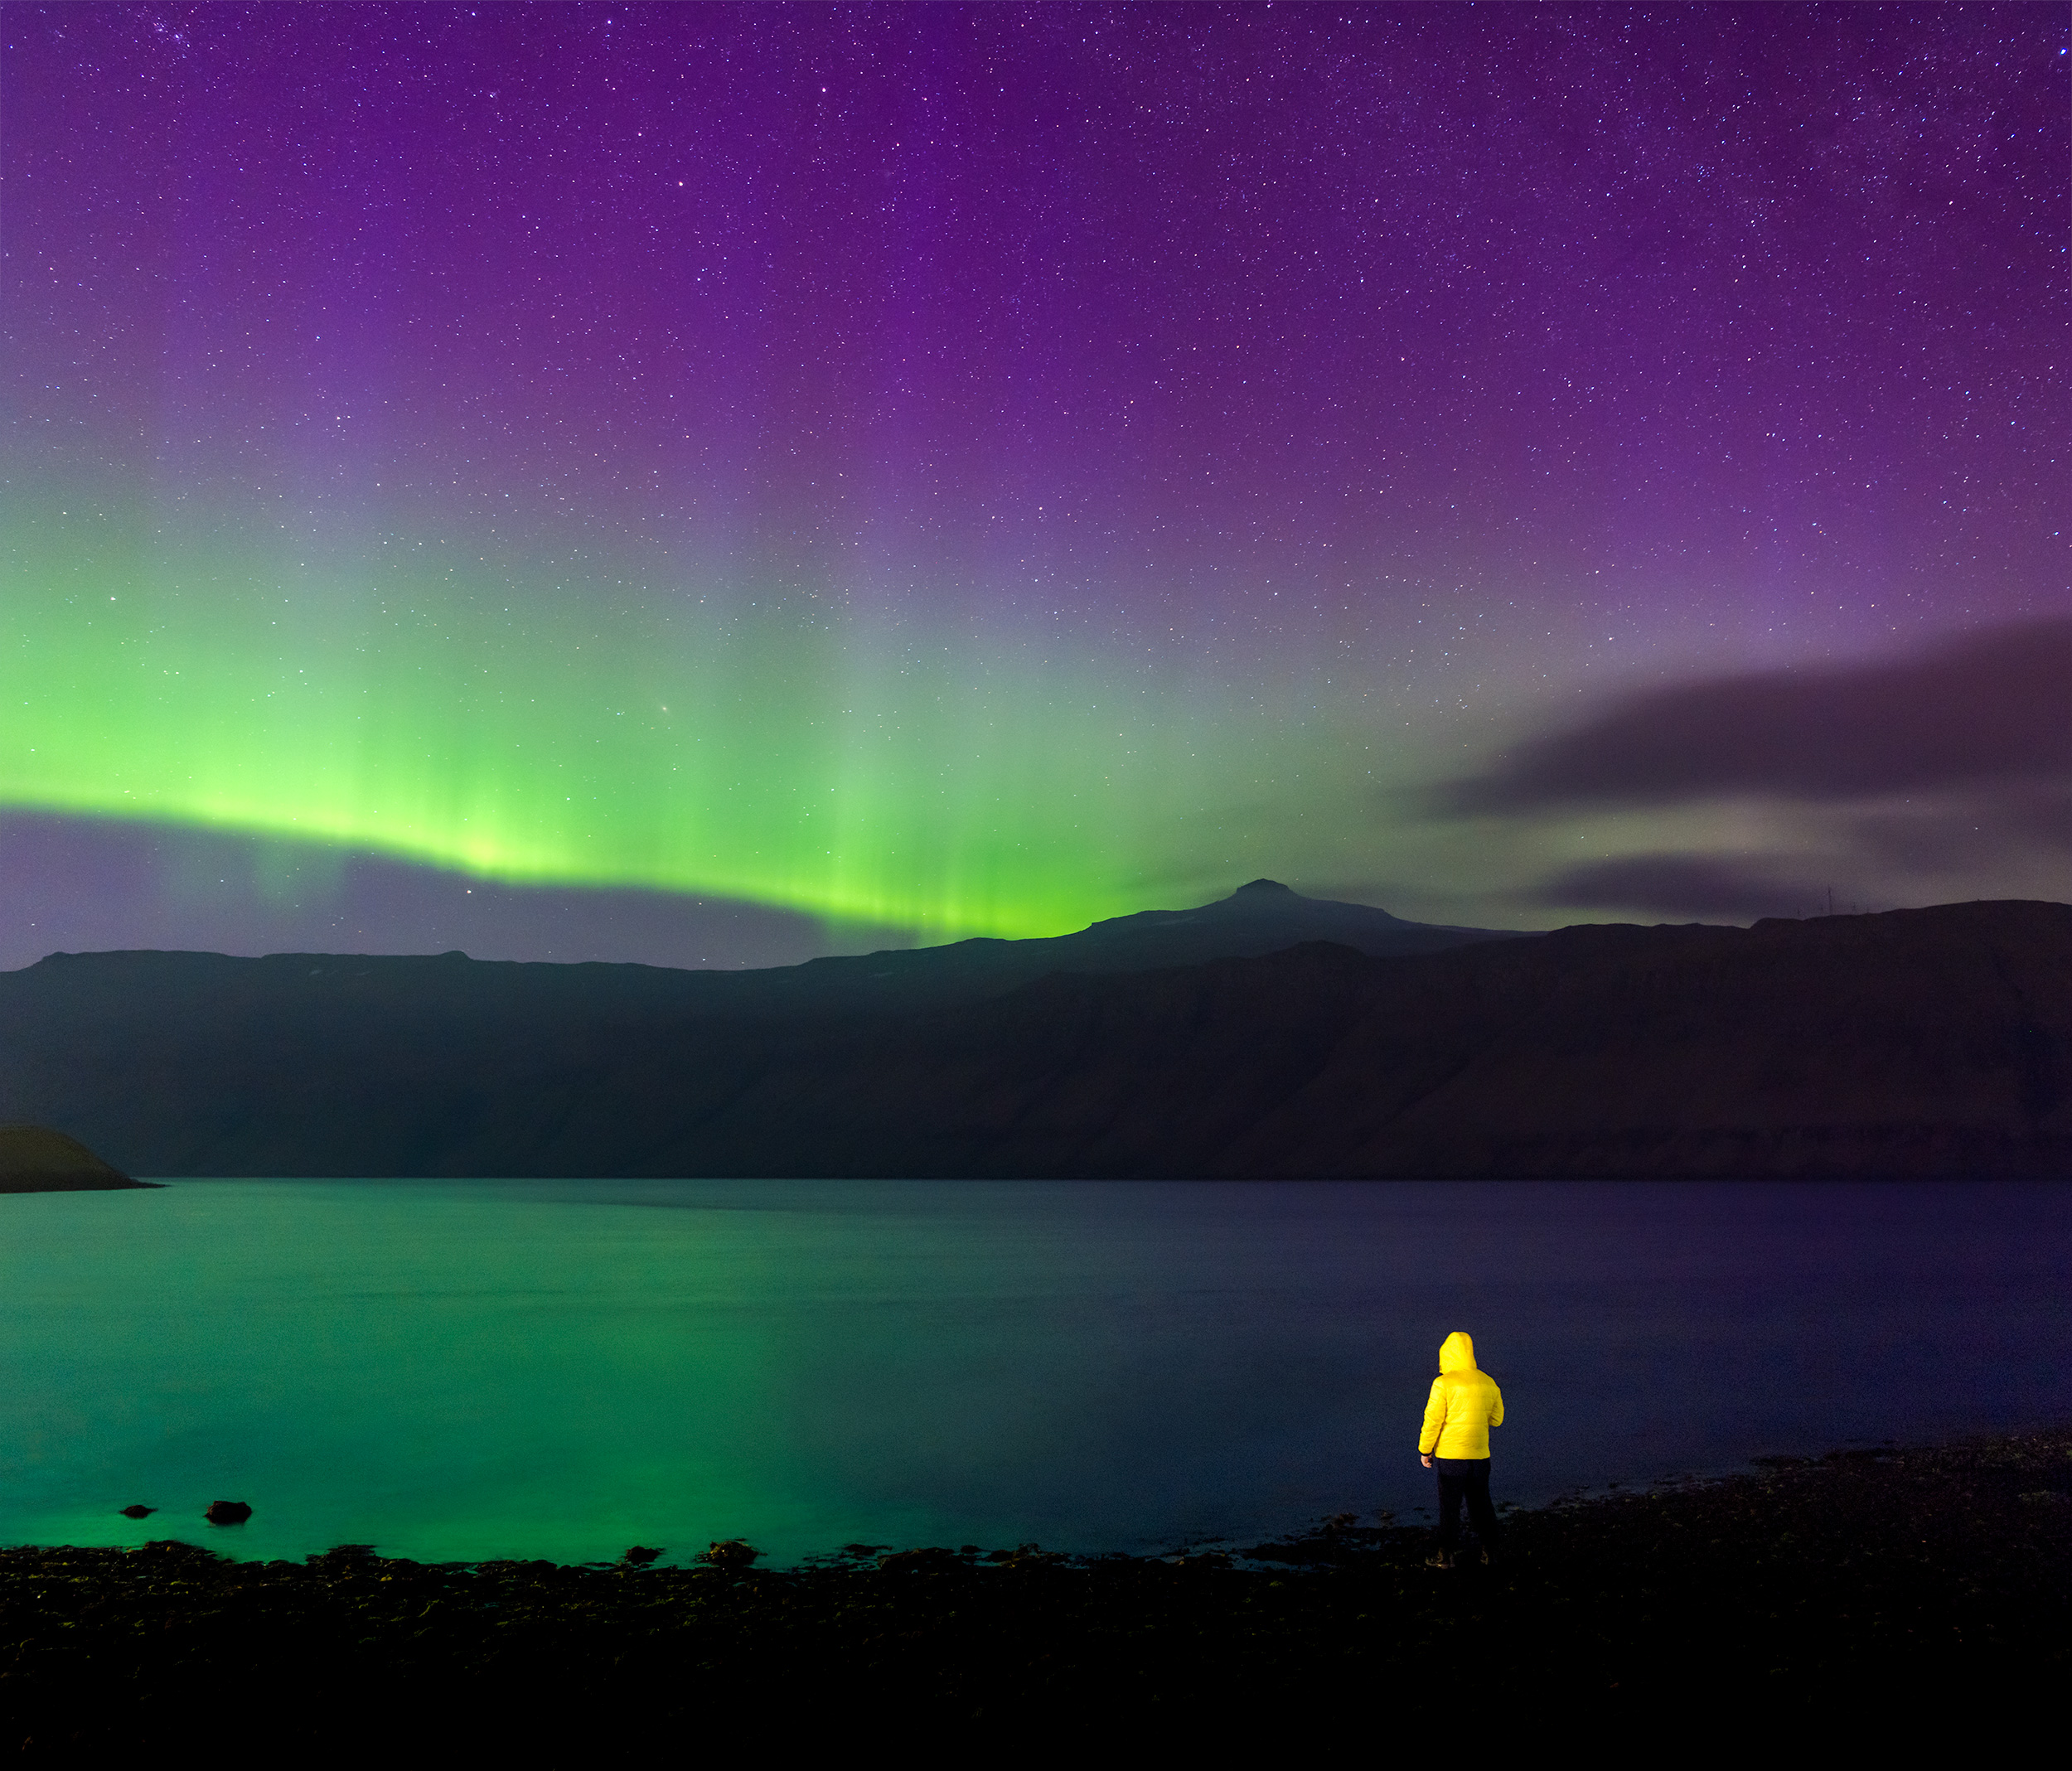 A landscape photograph capturing vibrant green and violet northern lights in the Faroe Islands. The image features a man wearing a yellow jacket, standing beneath the stunning aurora-filled sky.